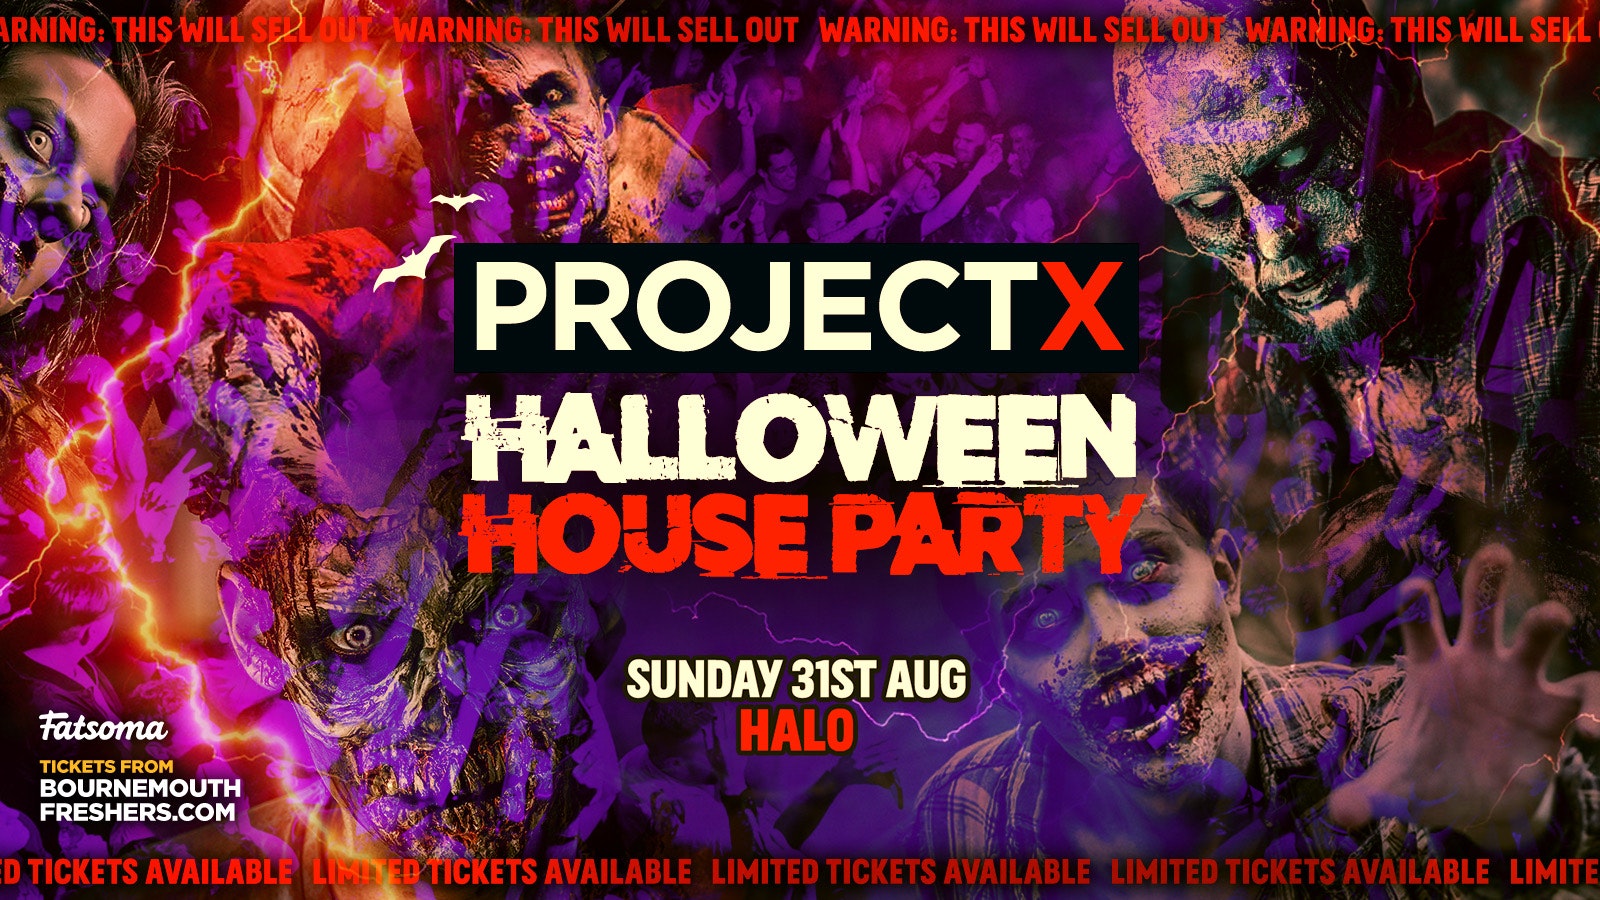 [SOLD OUT] Project X Halloween House Party 2021 – The BIGGEST American Themed House Party This Year | Bournemouth Freshers 2021